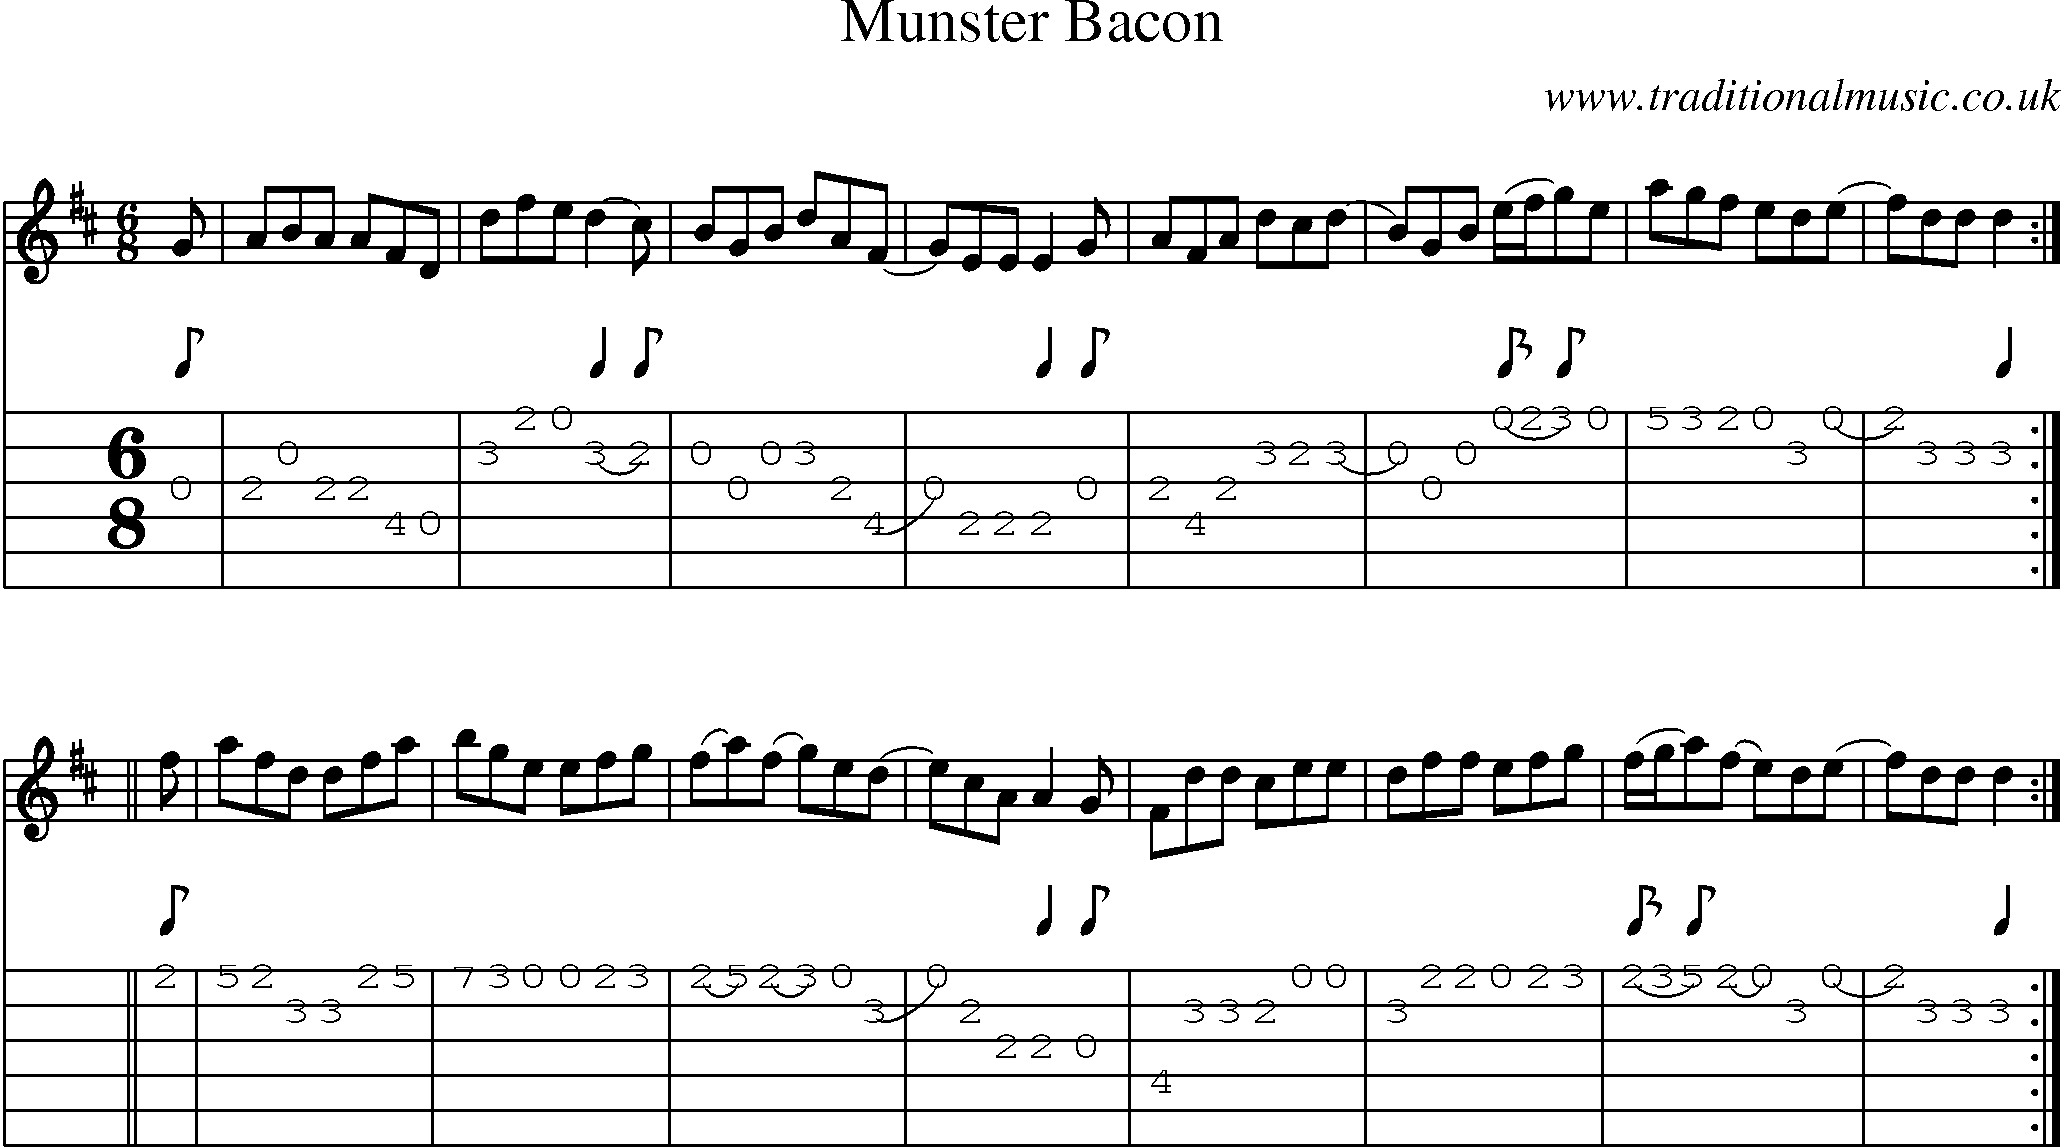 Music Score and Guitar Tabs for Munster Bacon